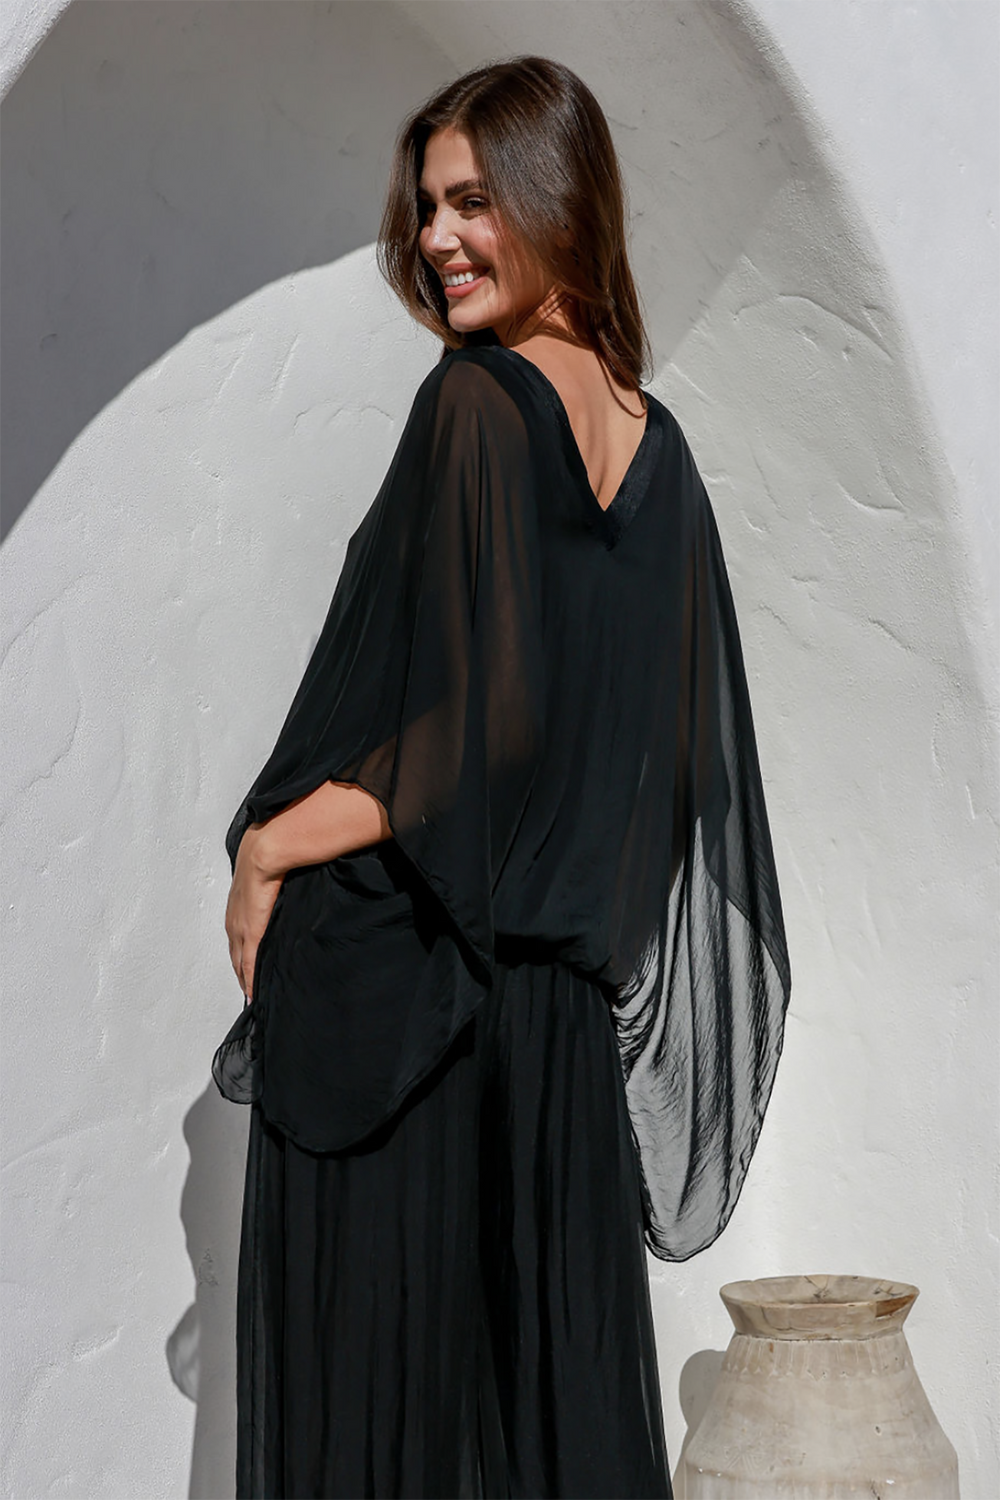 emiliana top in black by the Italian carte back view